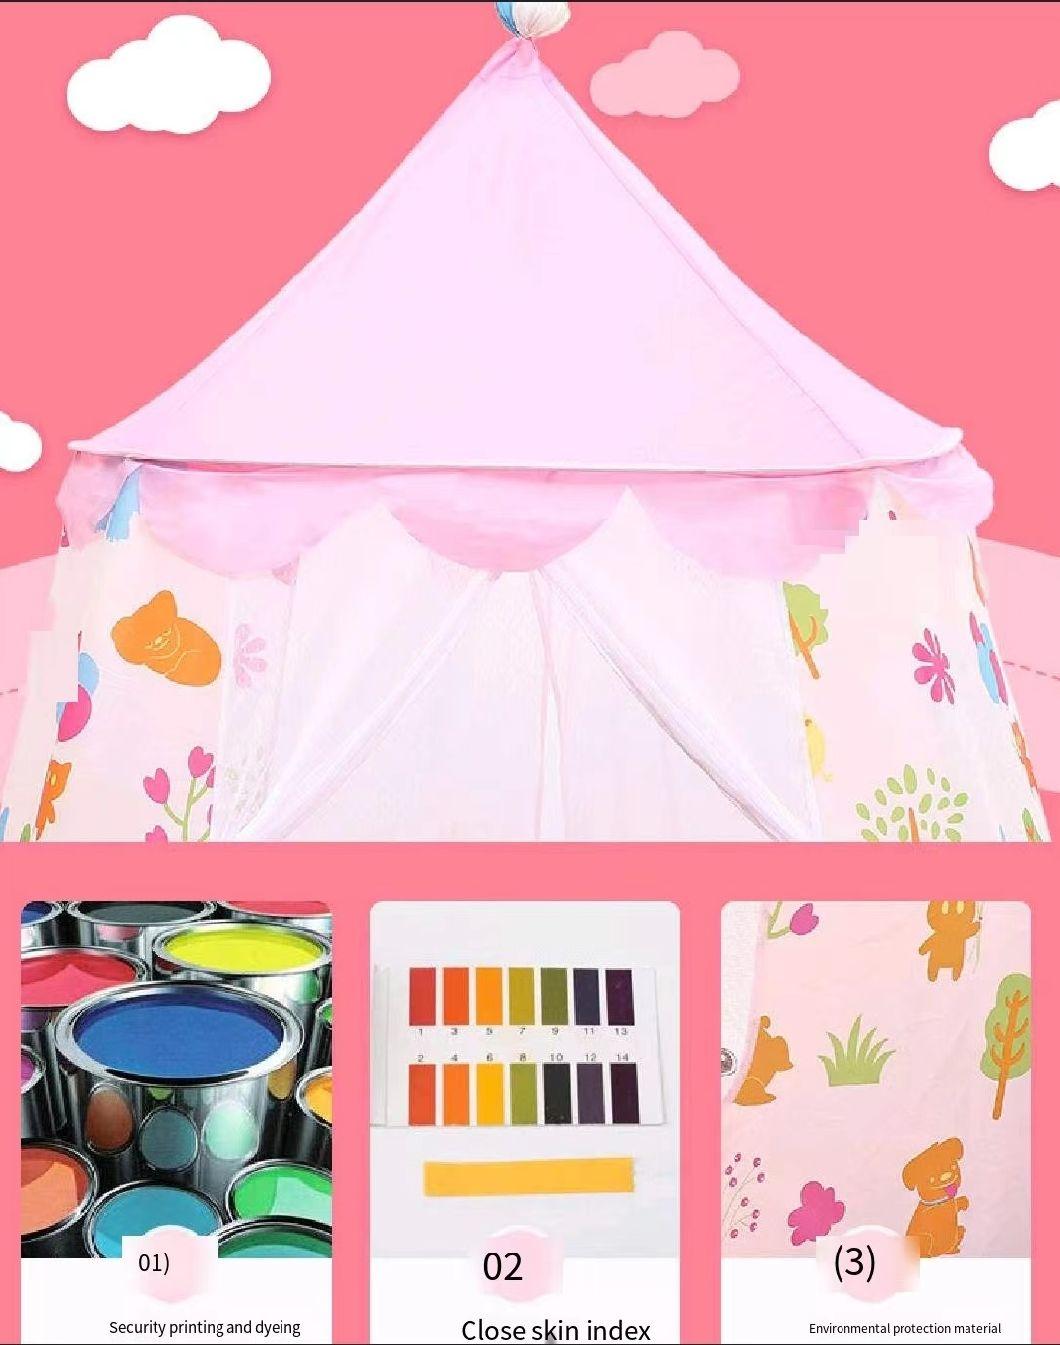 Girls and Boys Play House Kids Small Castle Play Tent for Children Indoor Toy House for Kindergarten